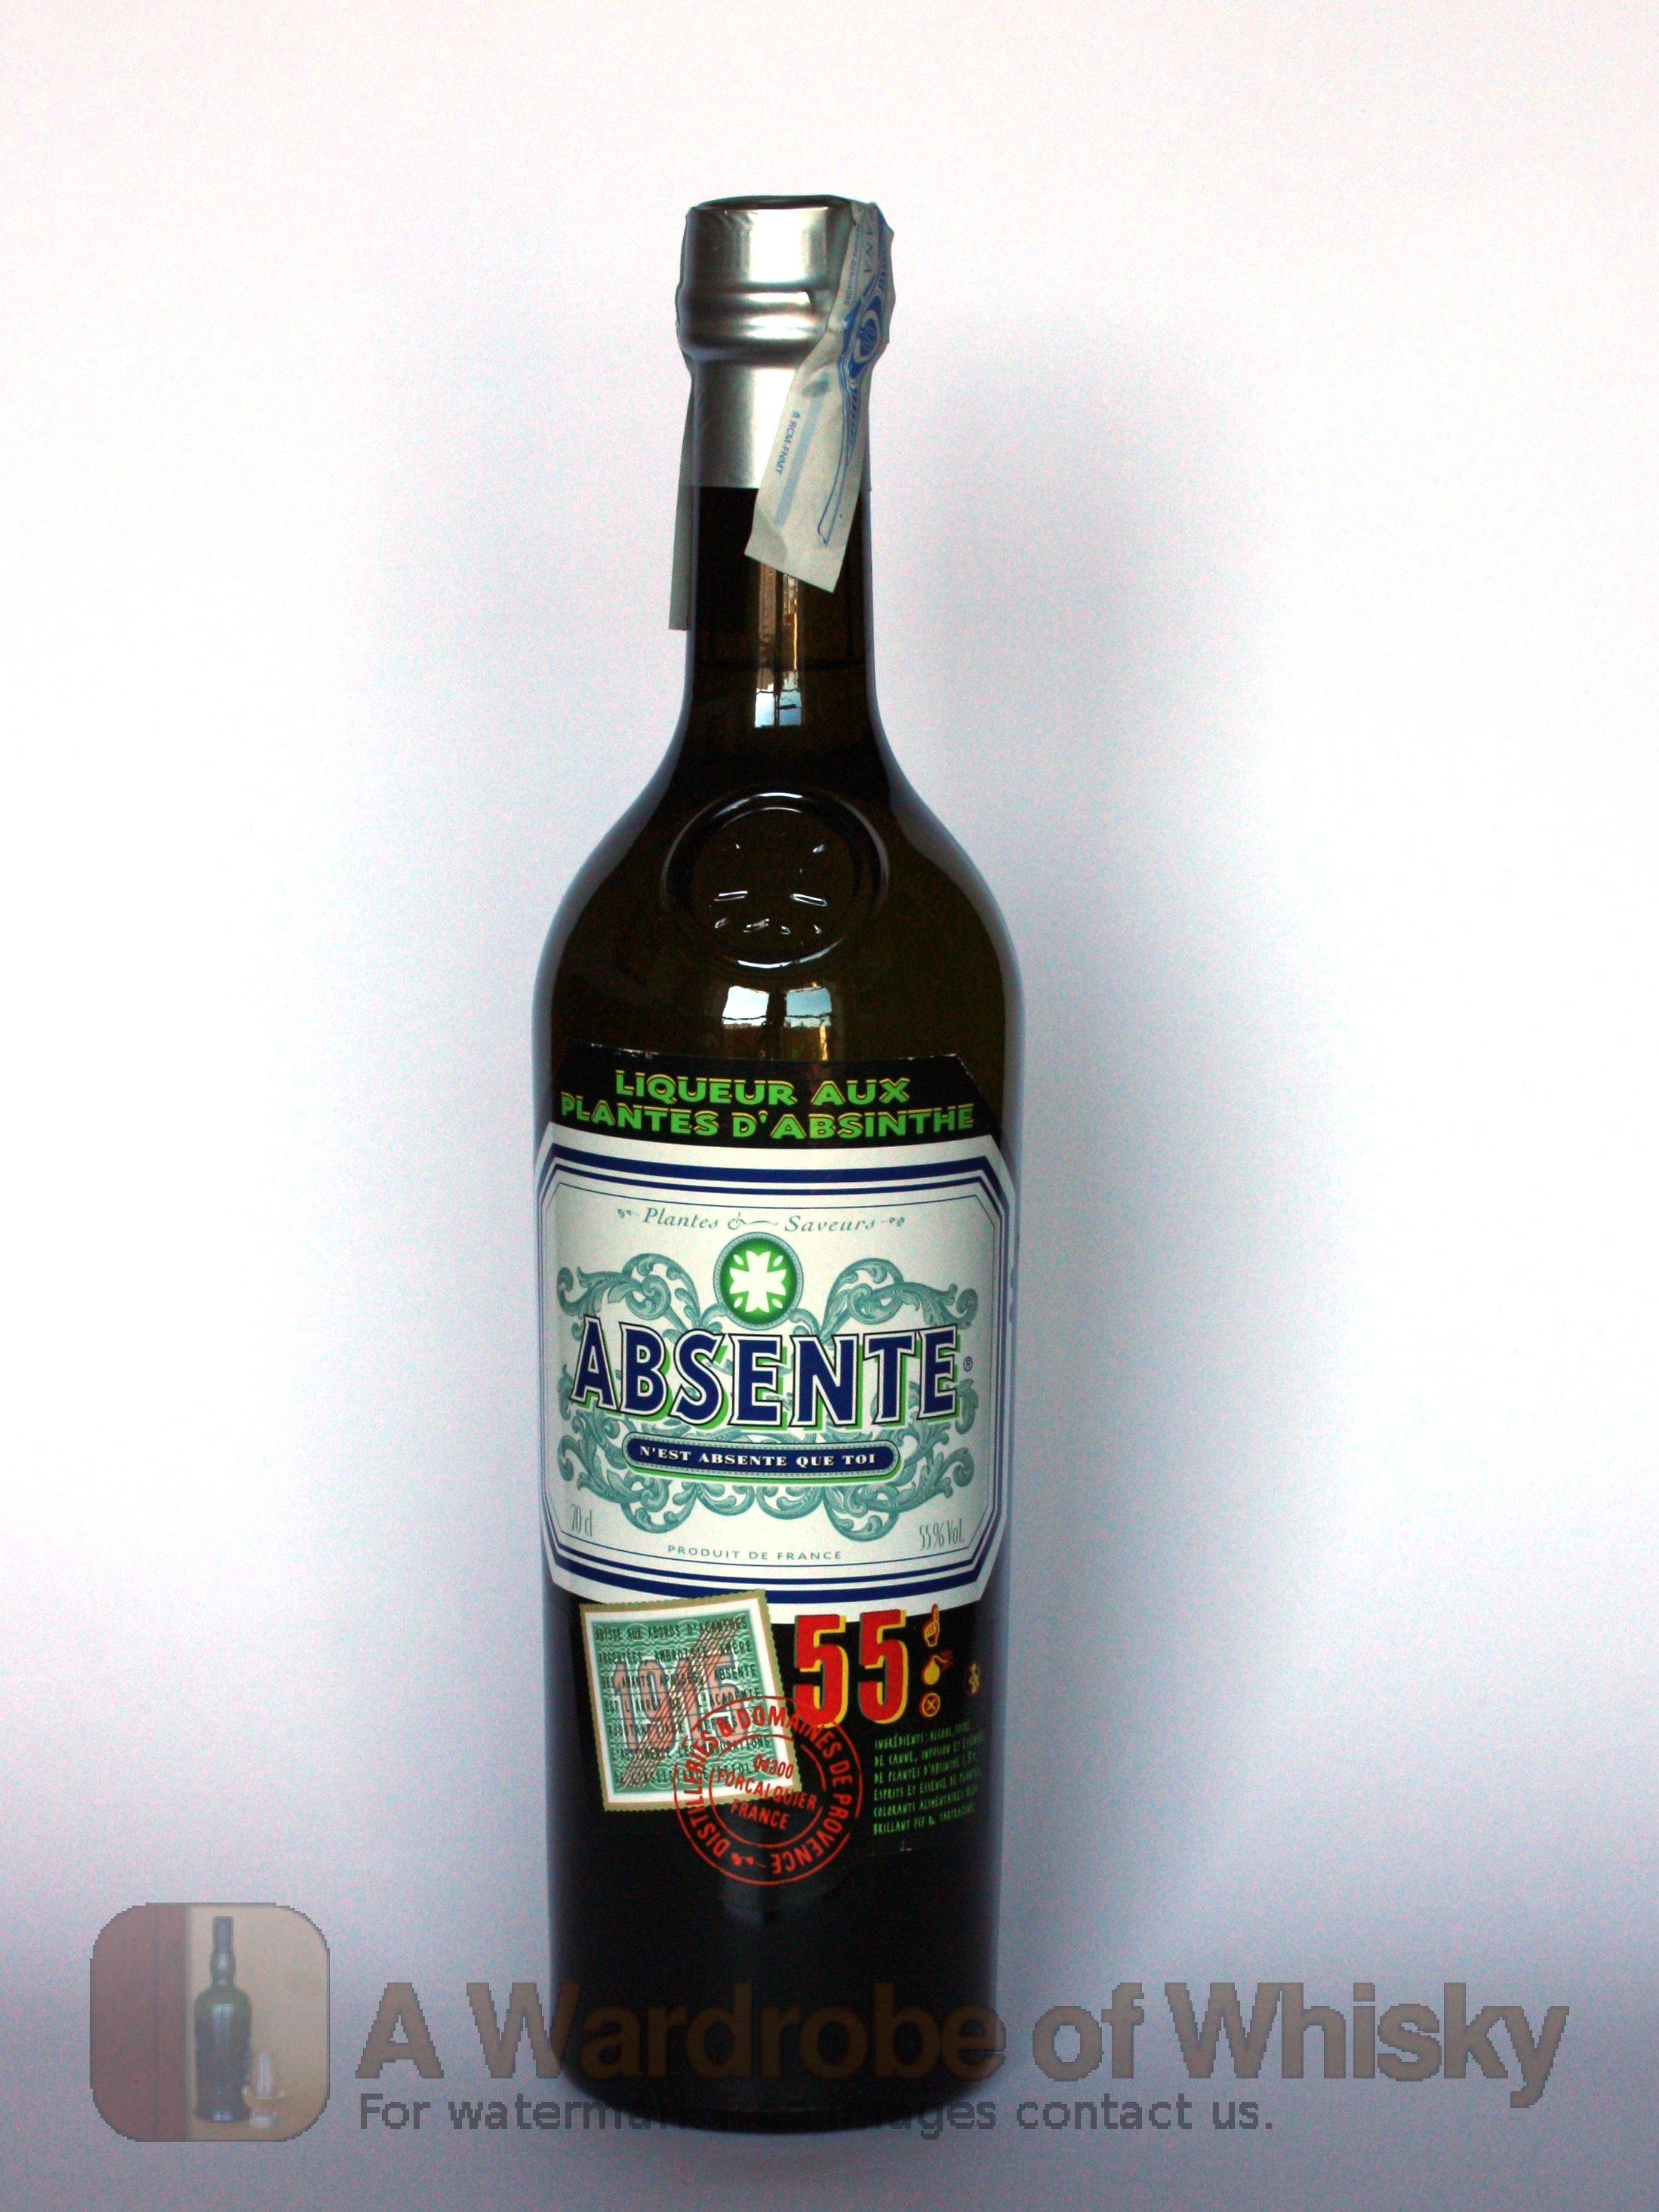 Buy Absente Liqueur Provence Whisky Ratings & Reviews